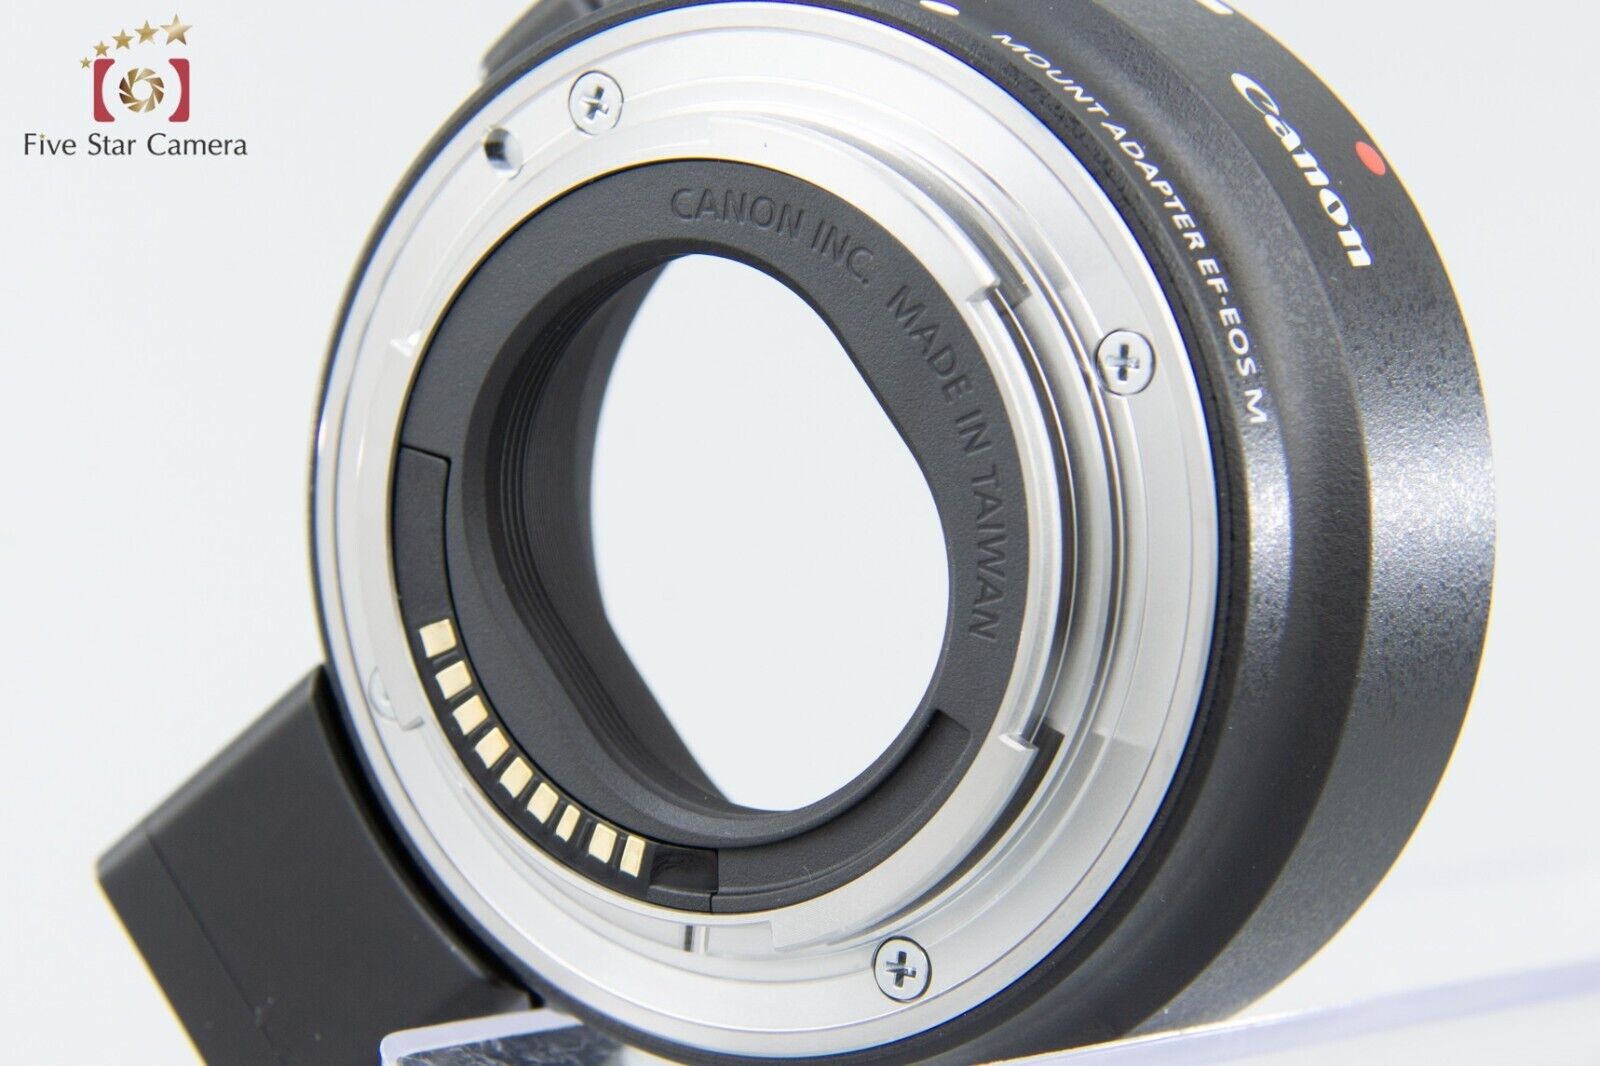 Mint!! Canon Mount Adapter EF-EOS M